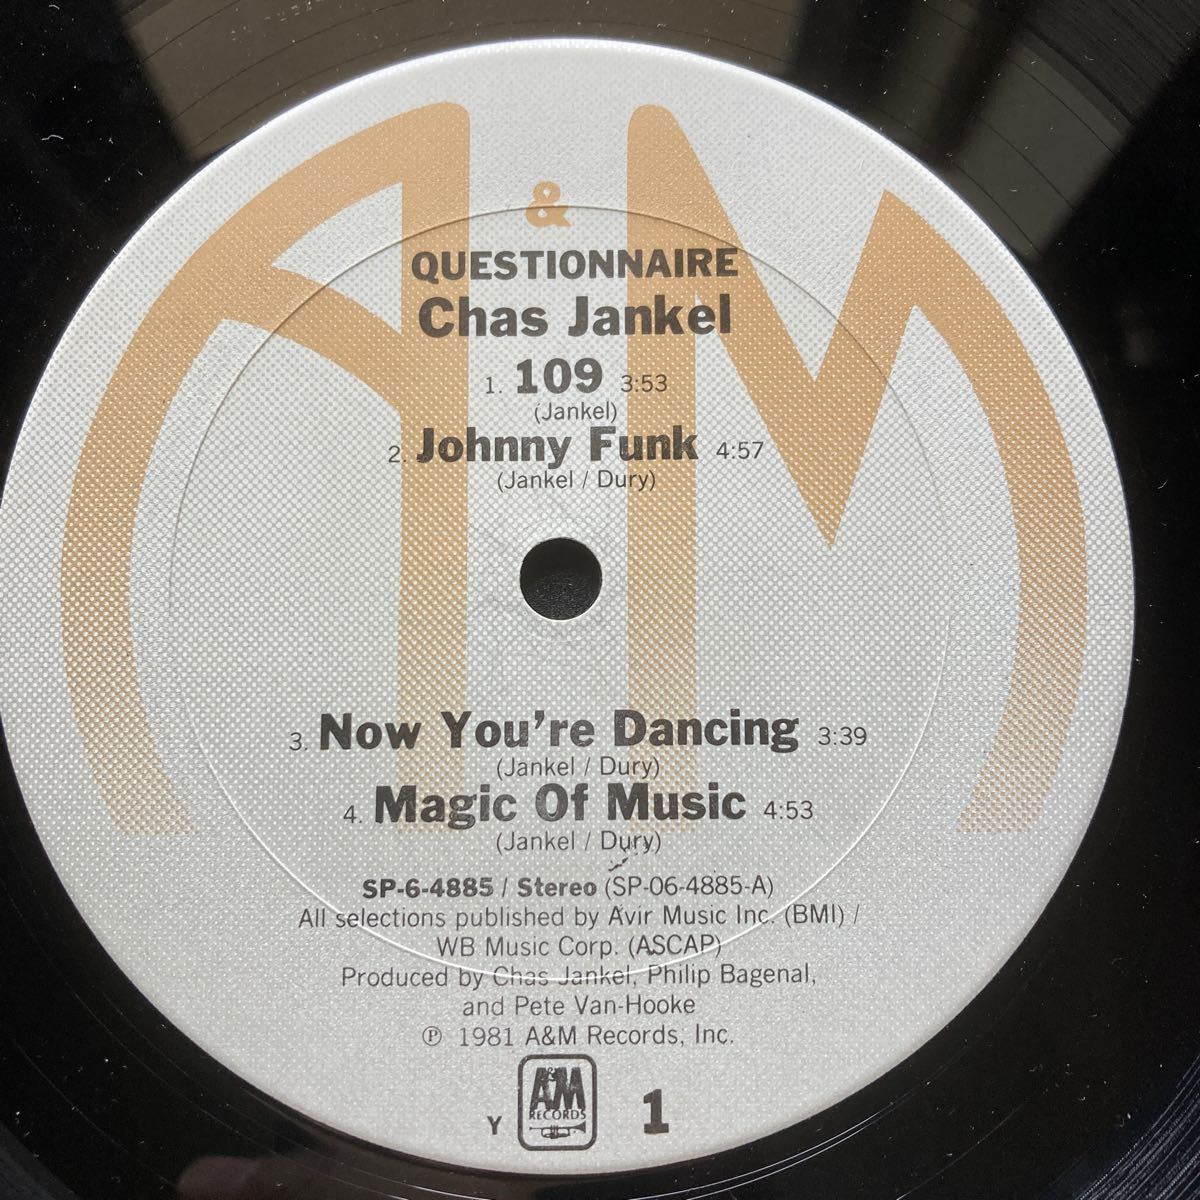 12inch CHAS JANKEL / QUESTIONNAIRE_画像7